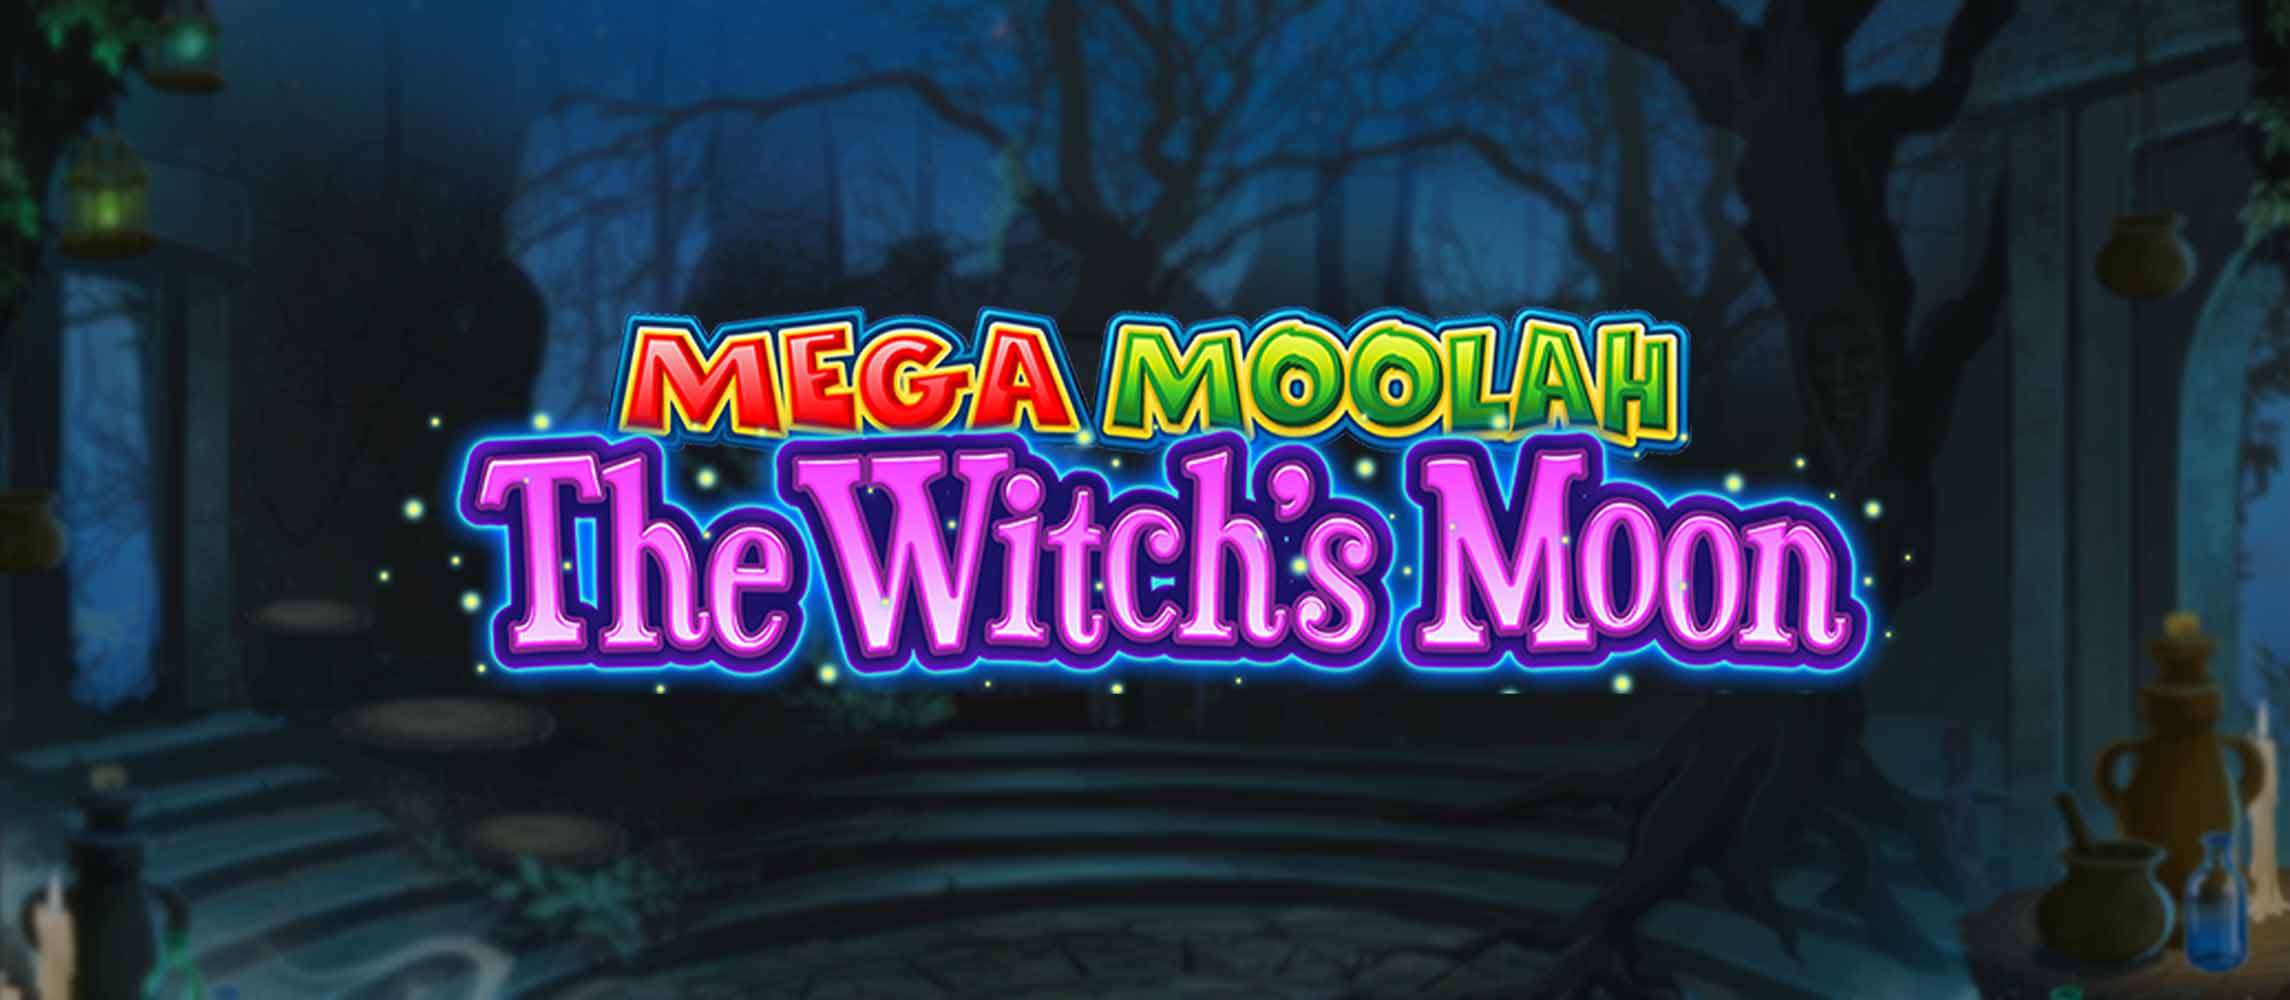 Mega Moolah The Witch’s Moon by Microgaming